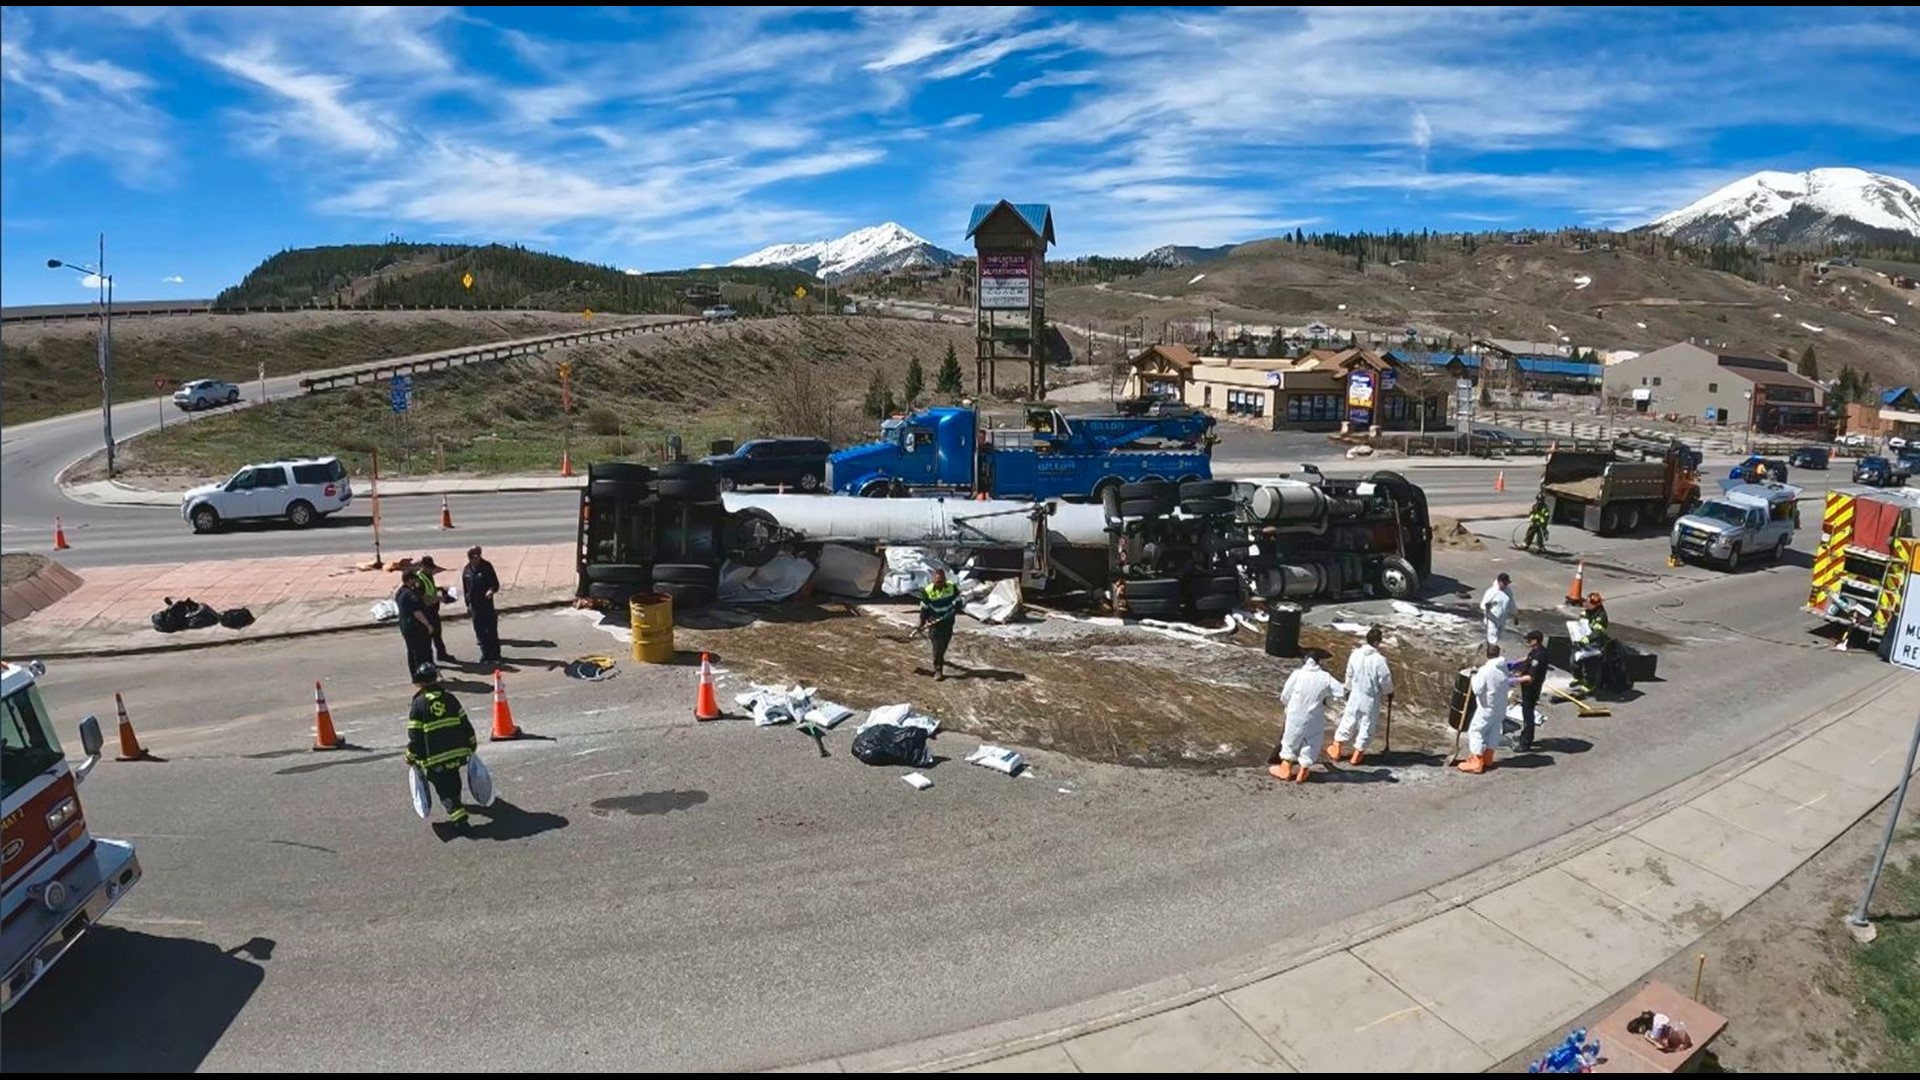 Traffic is expected to be impacted for most of Tuesday while crews work to clean up about 100 gallons of emulsified petroleum resin that spilled.